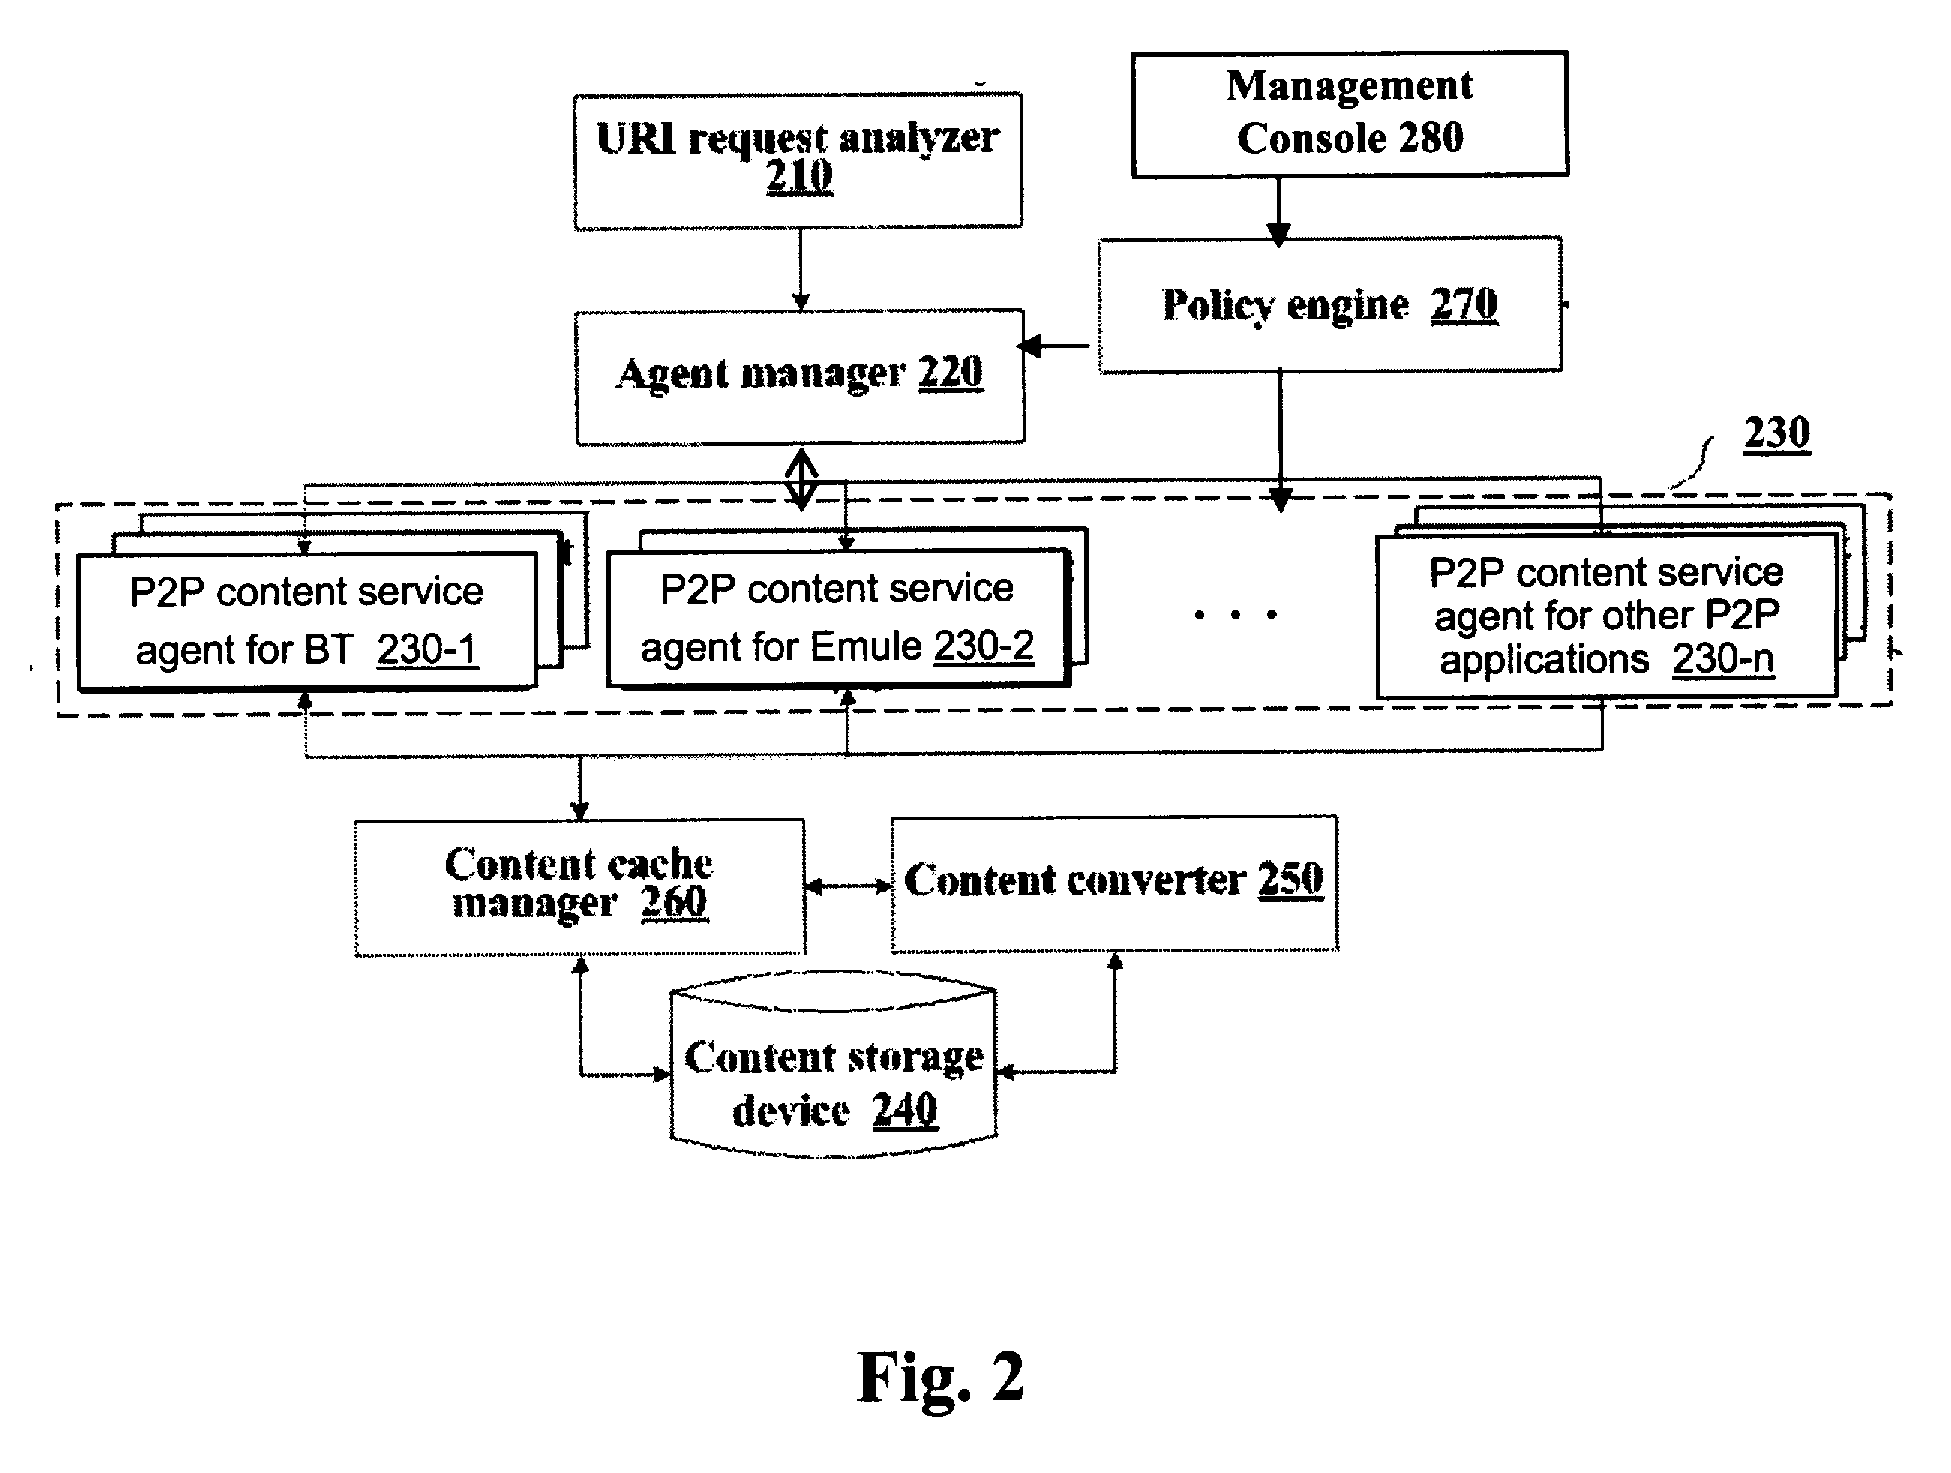 System and Method For Enabling P2P Applications in a Wireless Mobile Network